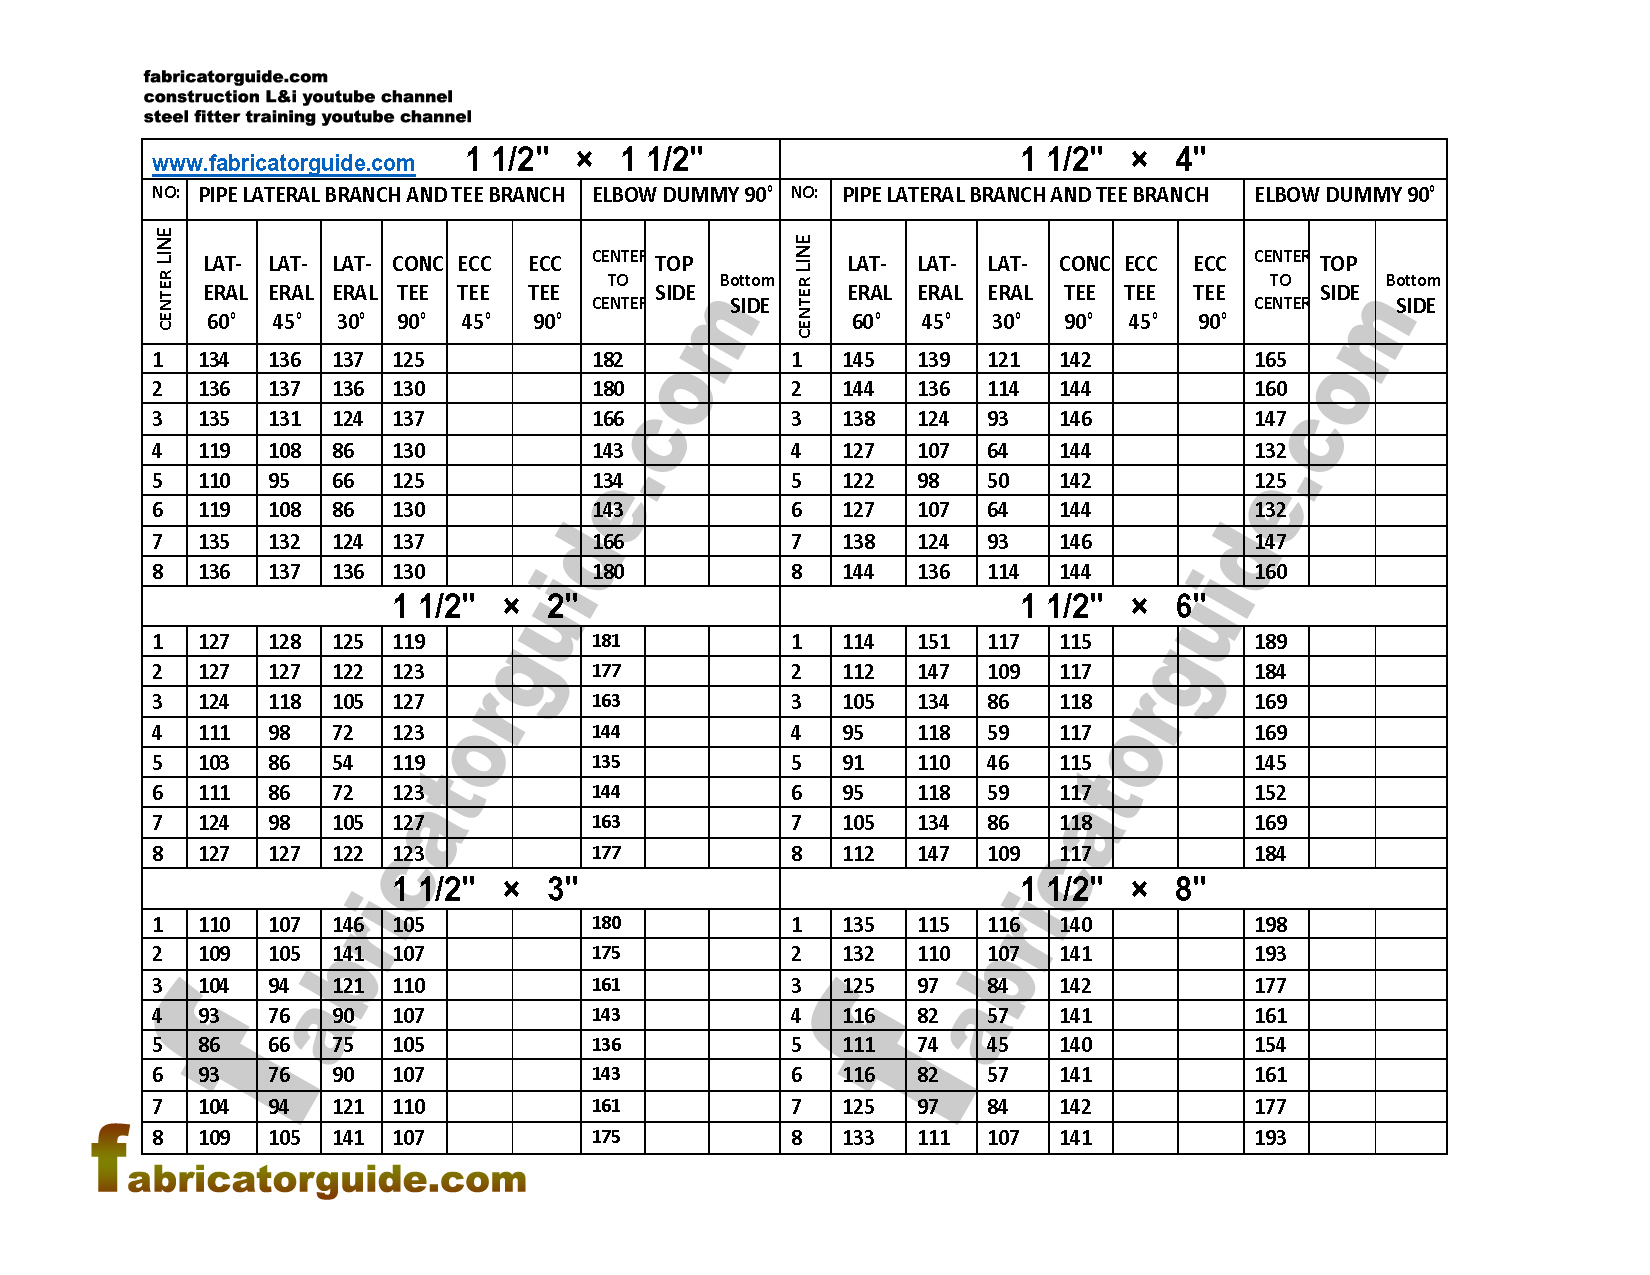 pipe branch dummy support PDF chart | 1 ½" × 1 ½"  1 ½" × 2" 1 ½" × 3" 1 ½" × 4" 1 ½" × 6" 1 ½" × 8"